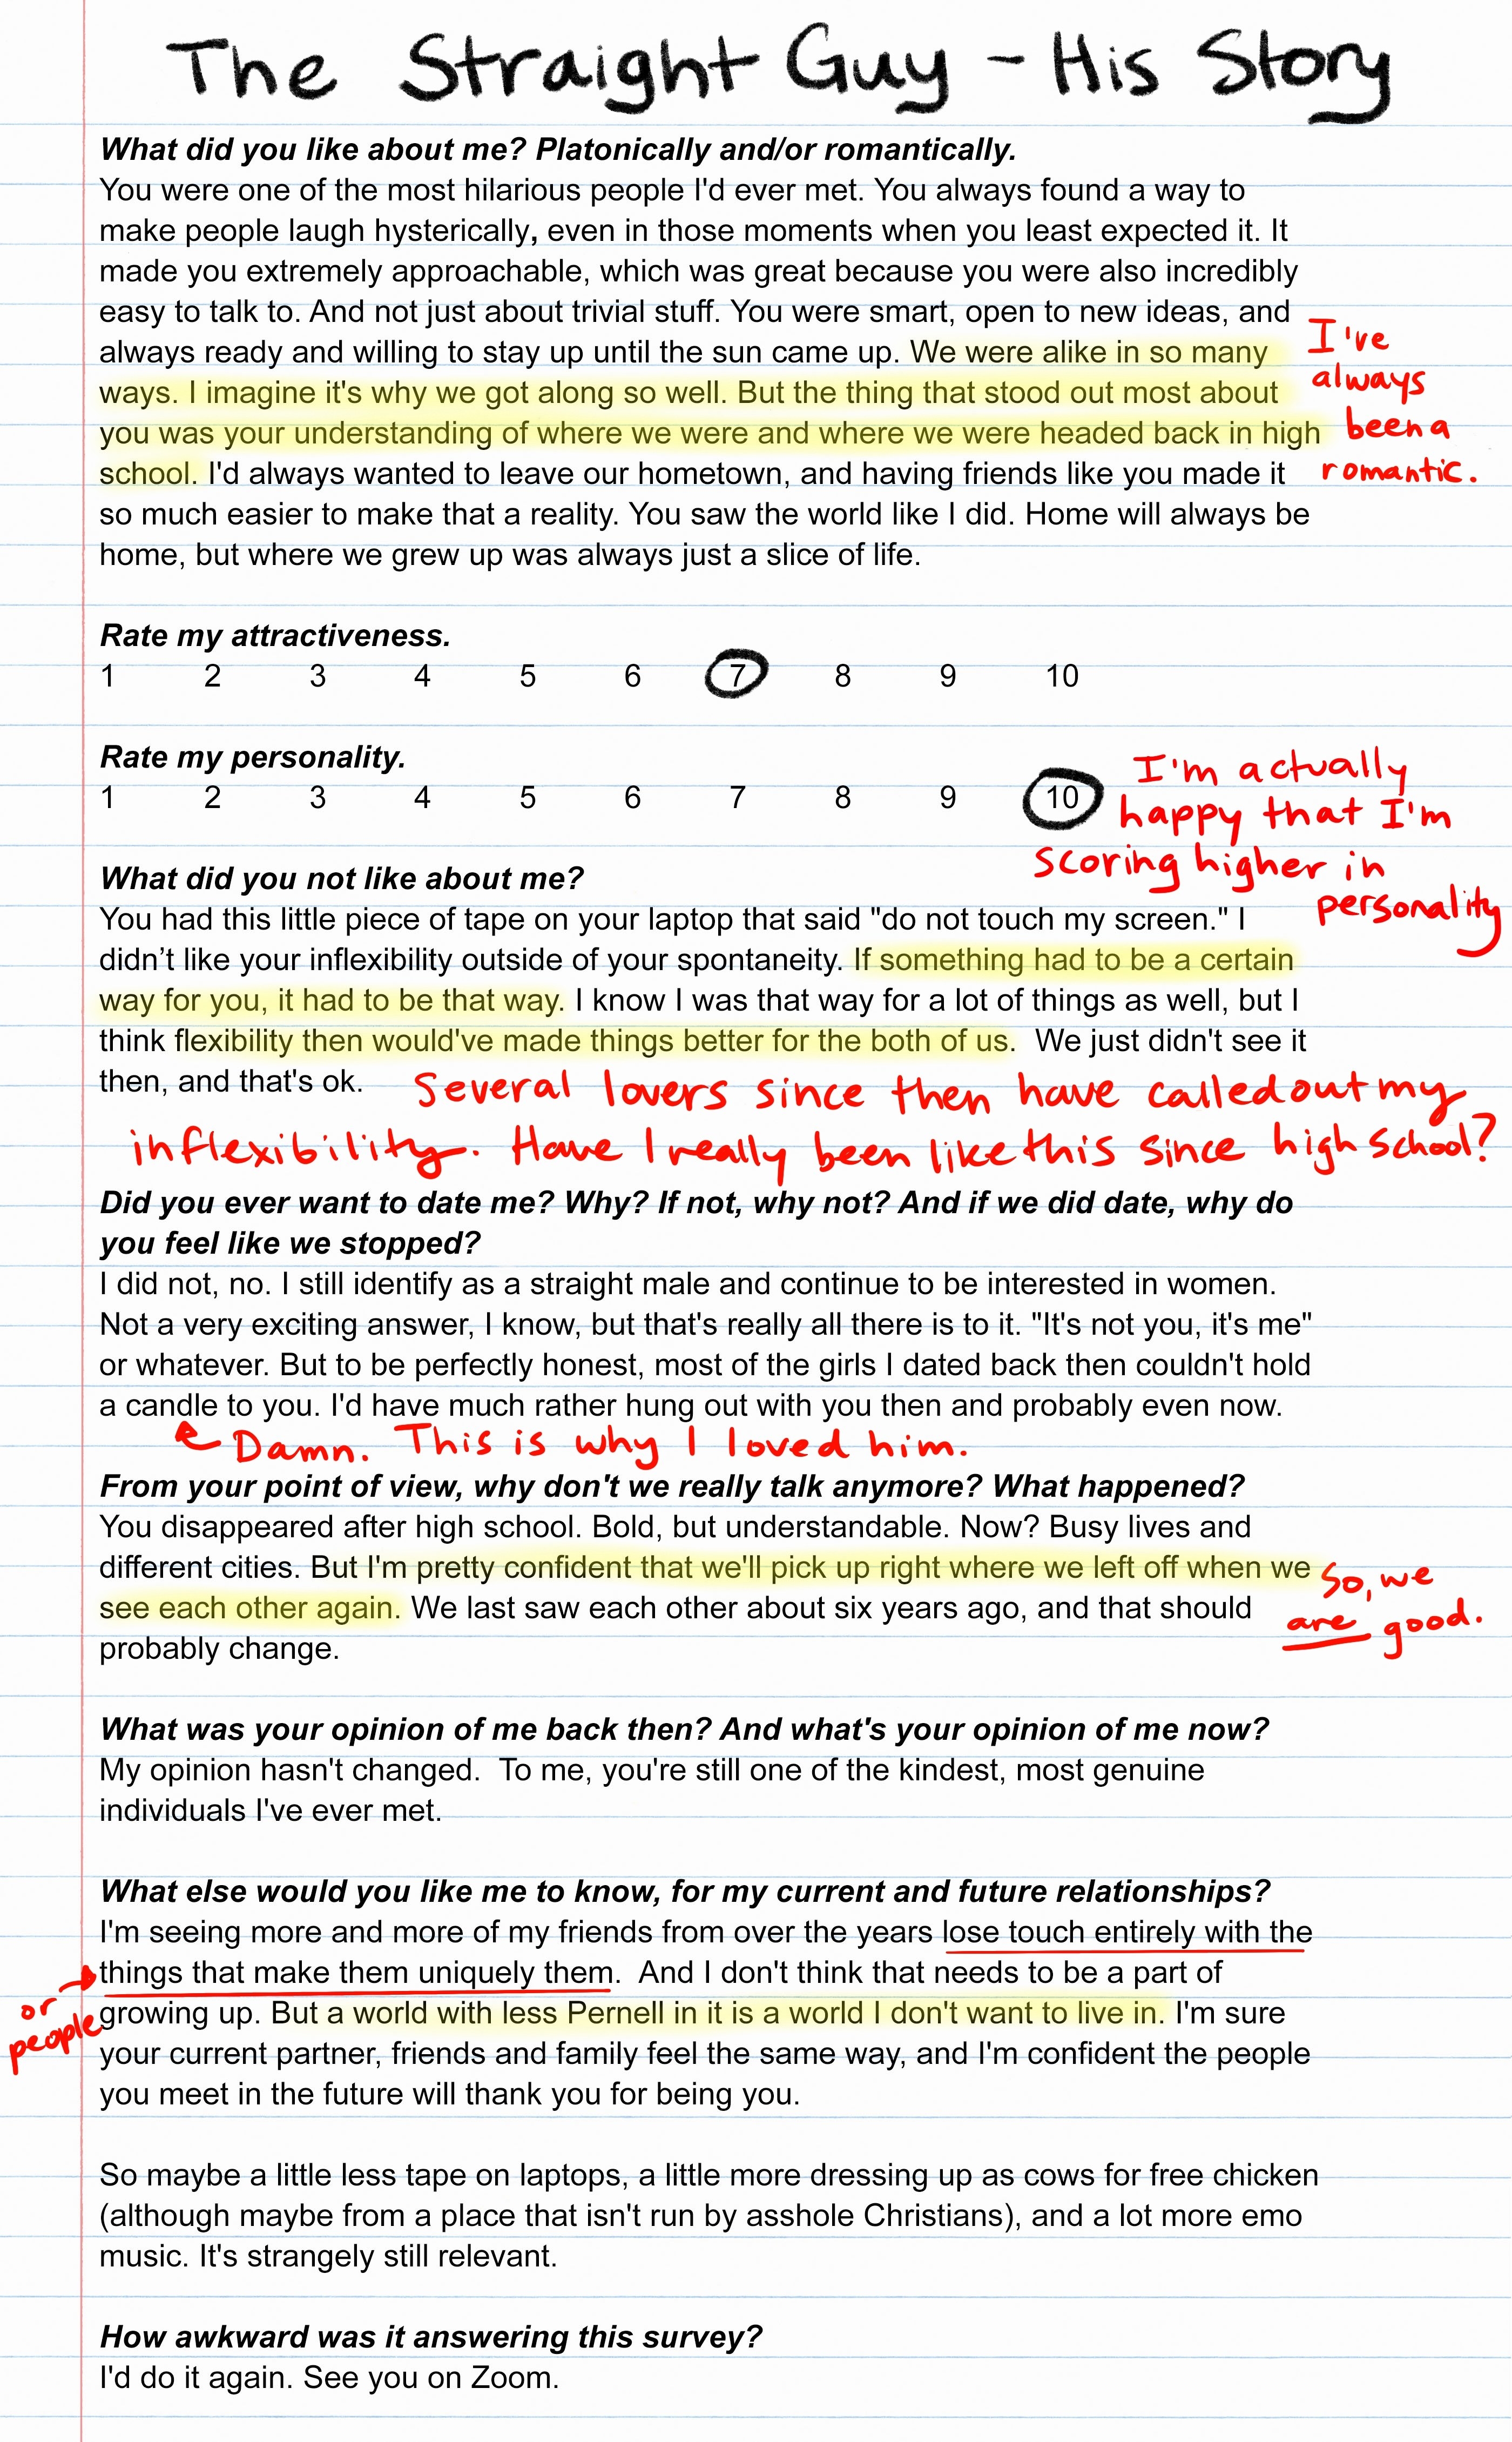 The Straight Guy&#x27;s survey responses on lined paper with notes from the author